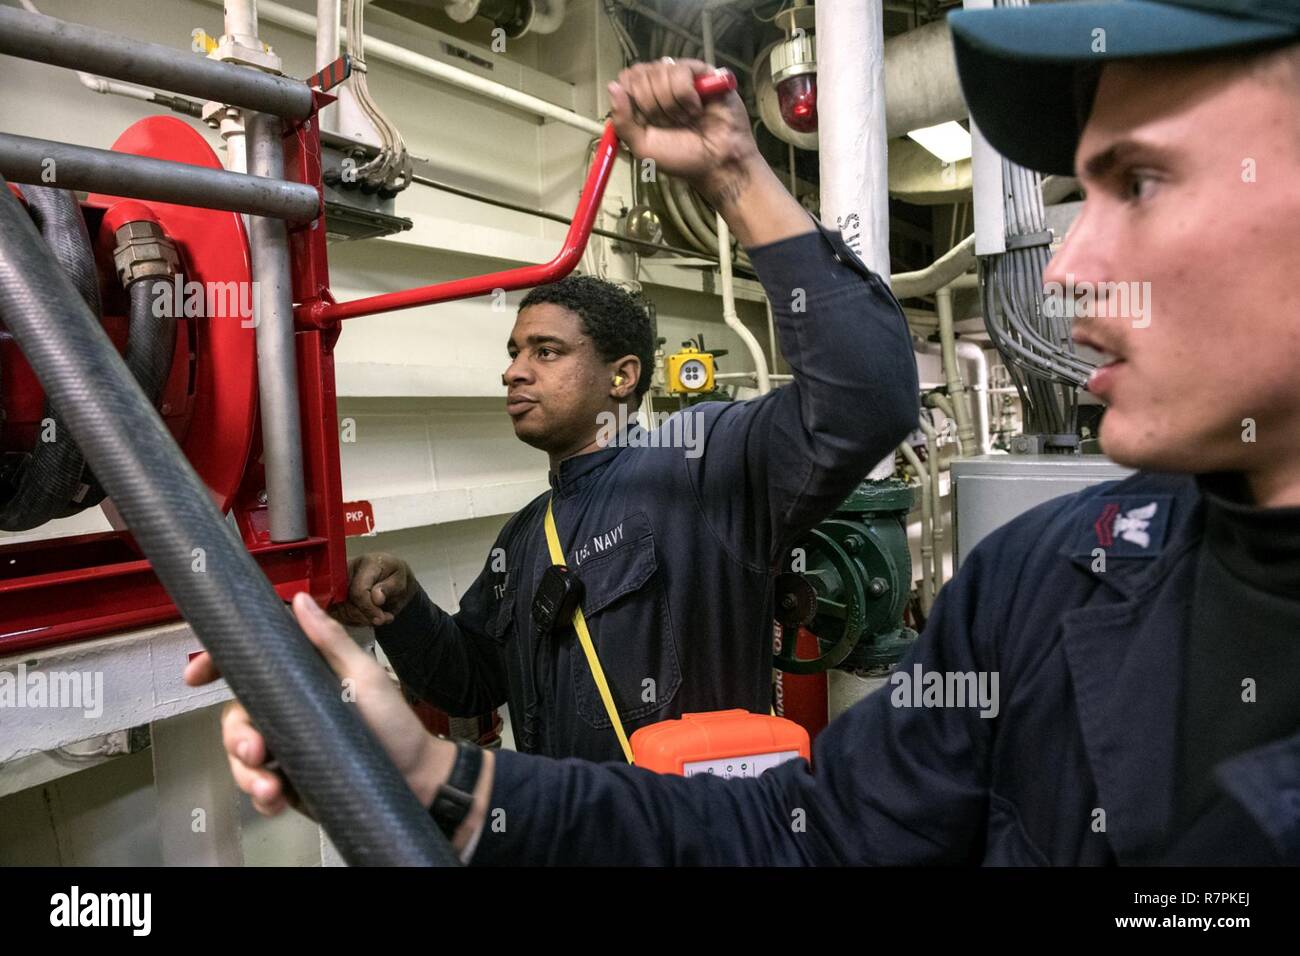 U.S. 7TH FLEET AREA OF OPERATIONS (March 20, 2017) Gas Turbine Systems Technician (Electrical) Fireman Samuel Thompson, from San Diego, left, reels in a fire hose as Machinist’s Mate 2nd Class Dakota Anders, from Hartselle, Alabama, guides it during an engineering training drill aboard Ticonderoga-class guided-missile cruiser USS Lake Champlain (CG 57). Lake Champlain is on a regularly scheduled Western Pacific deployment with the Carl Vinson Carrier Strike Group as part of the U.S. Pacific Fleet-led initiative to extend the command and control functions of the U.S. 3rd Fleet in the Indo-Asia- Stock Photo